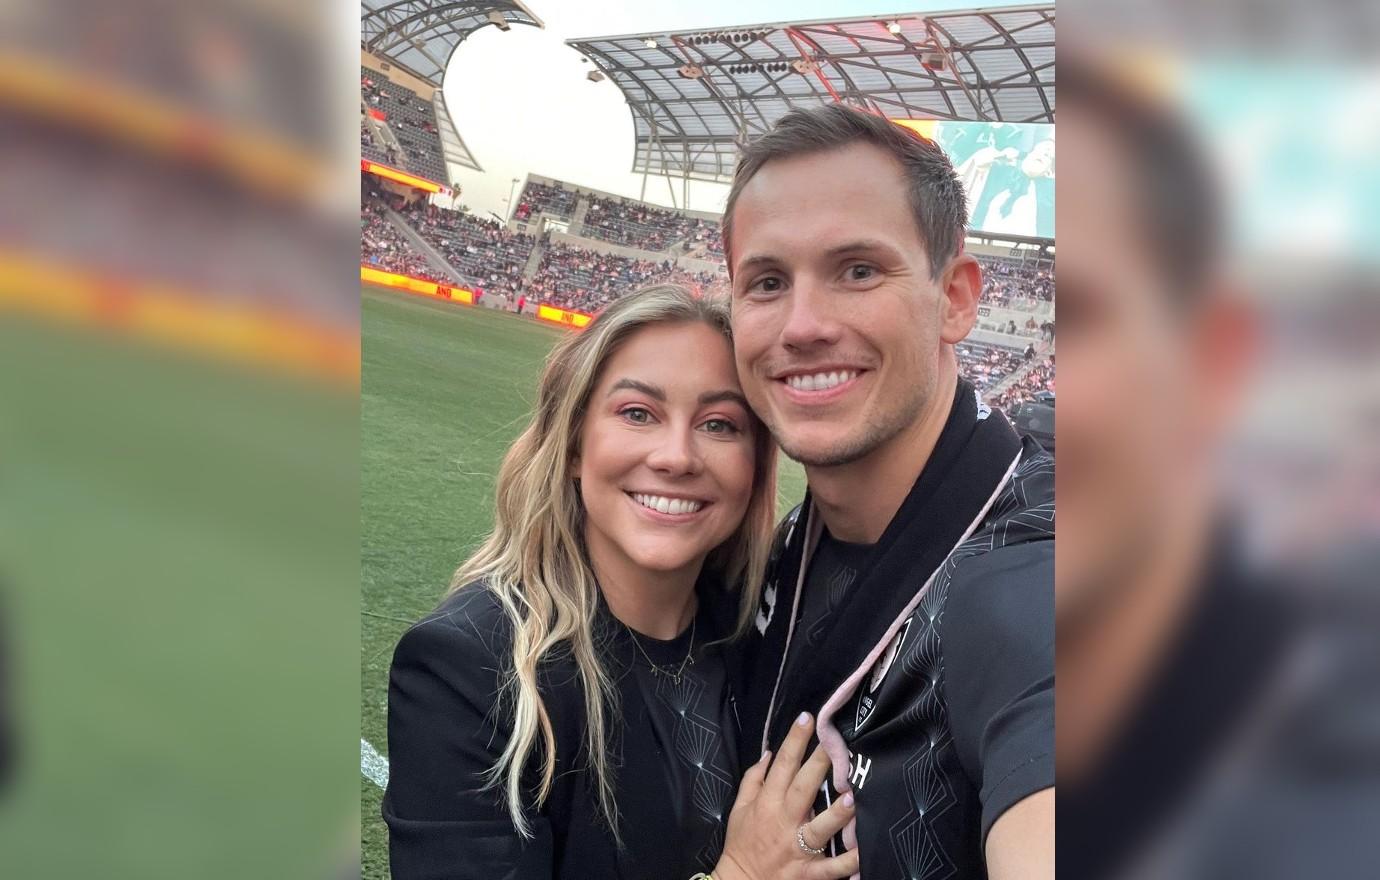 Shawn Johnson Kids' First Trip to Disney After Being Flown in Plane by Dad